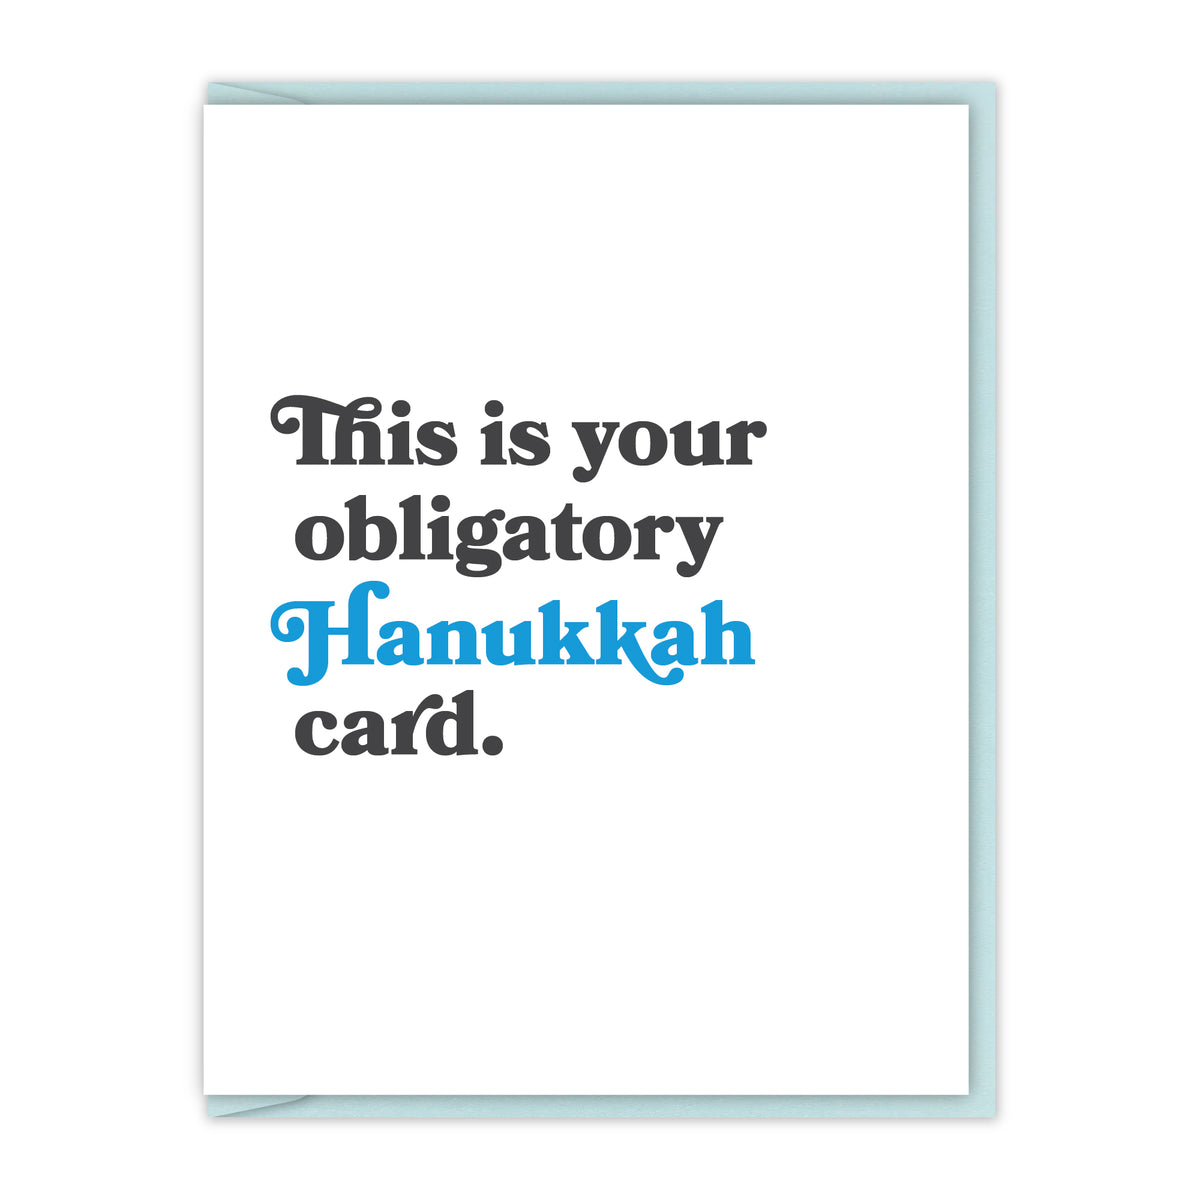 This is your obligatory Hanukkah card.